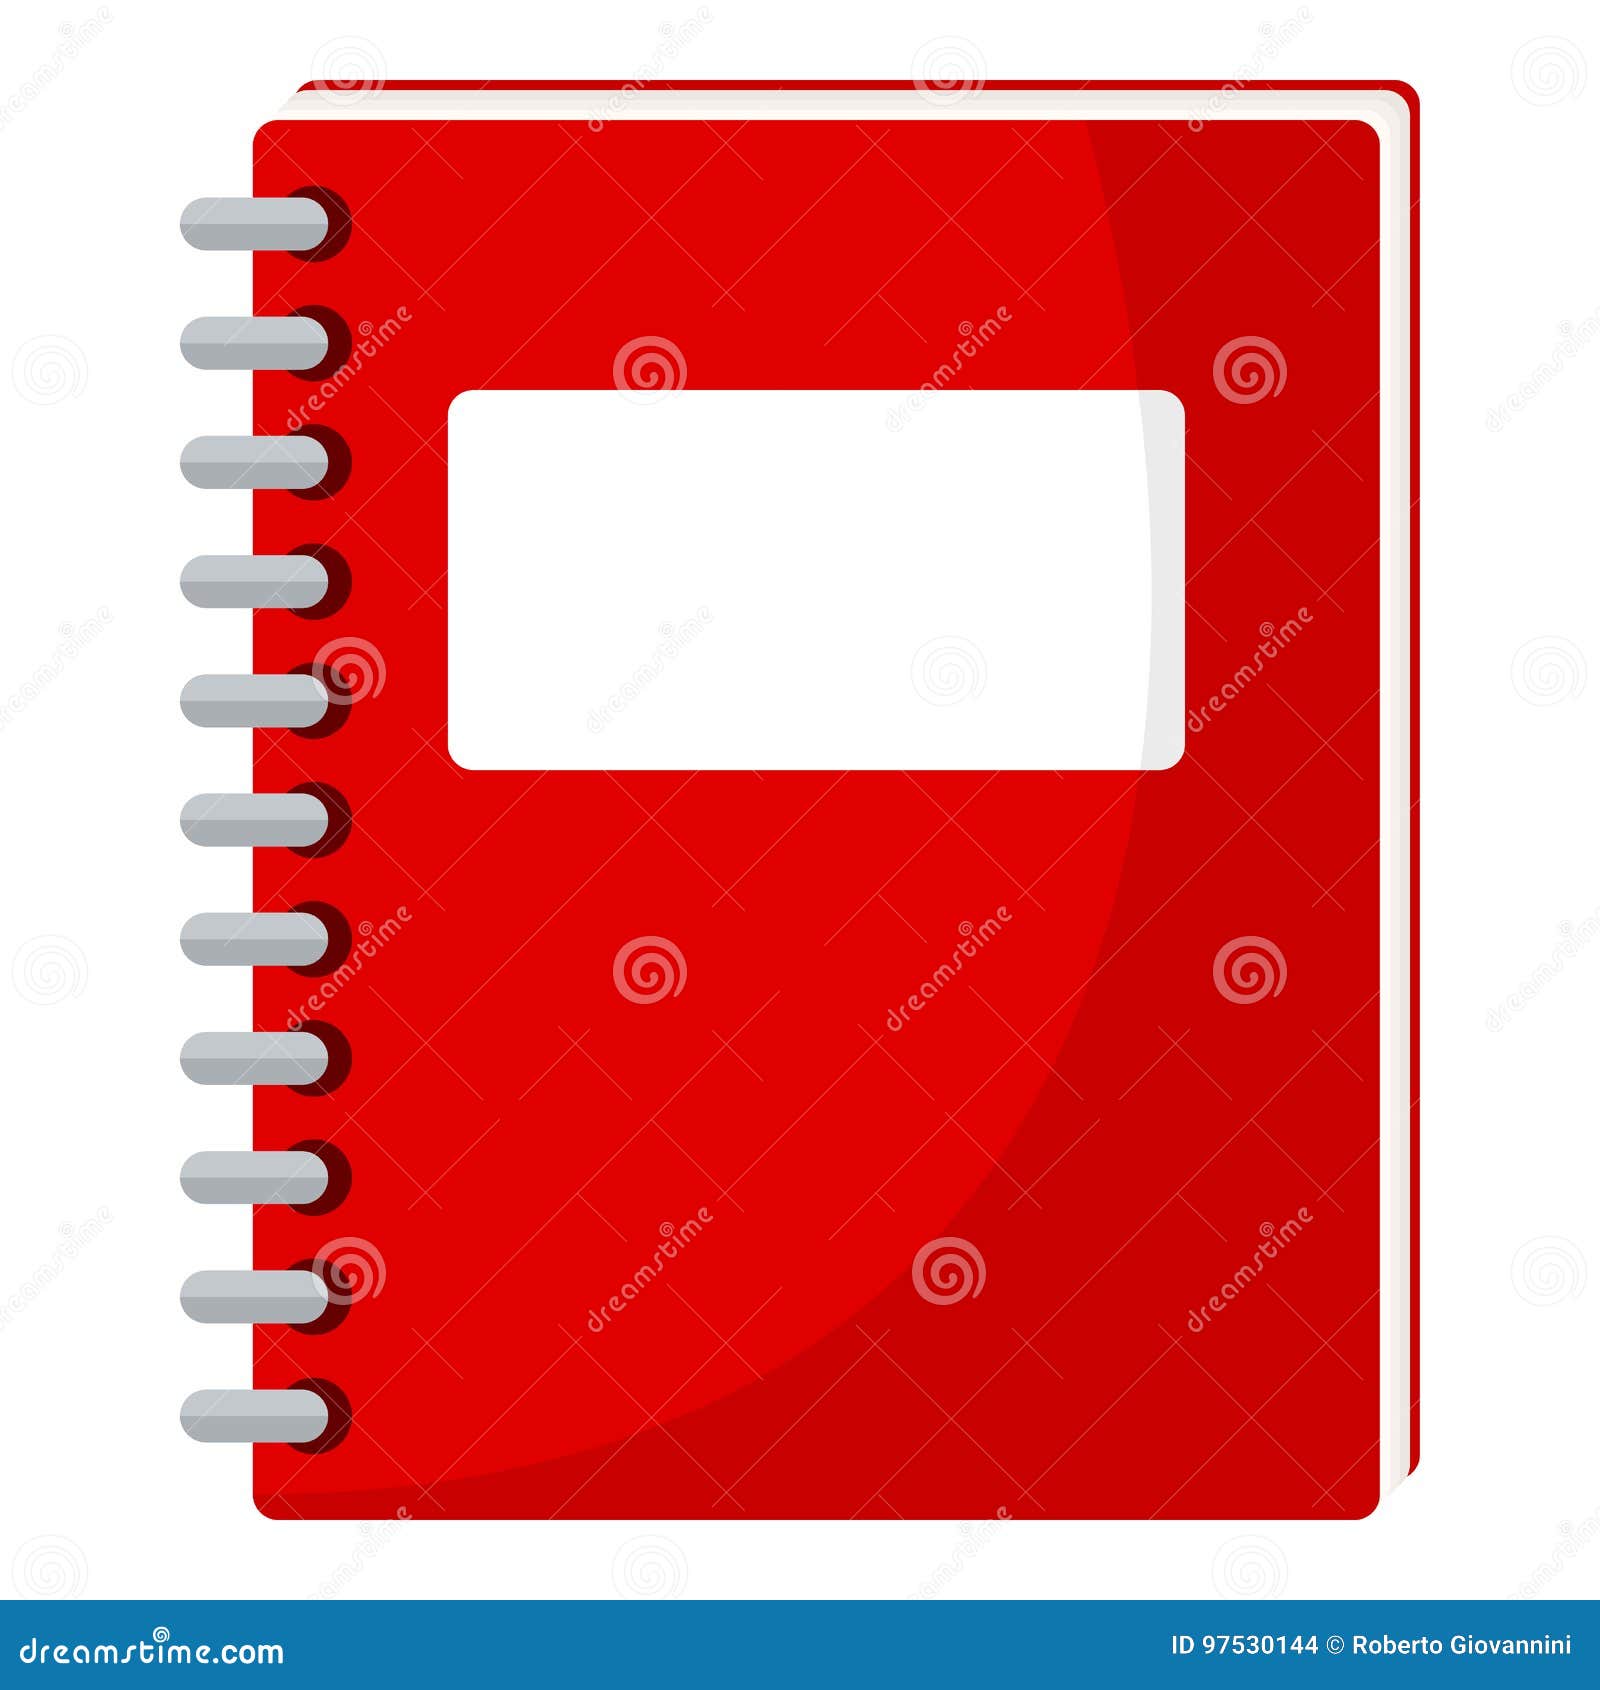 red school notebook flat icon on white